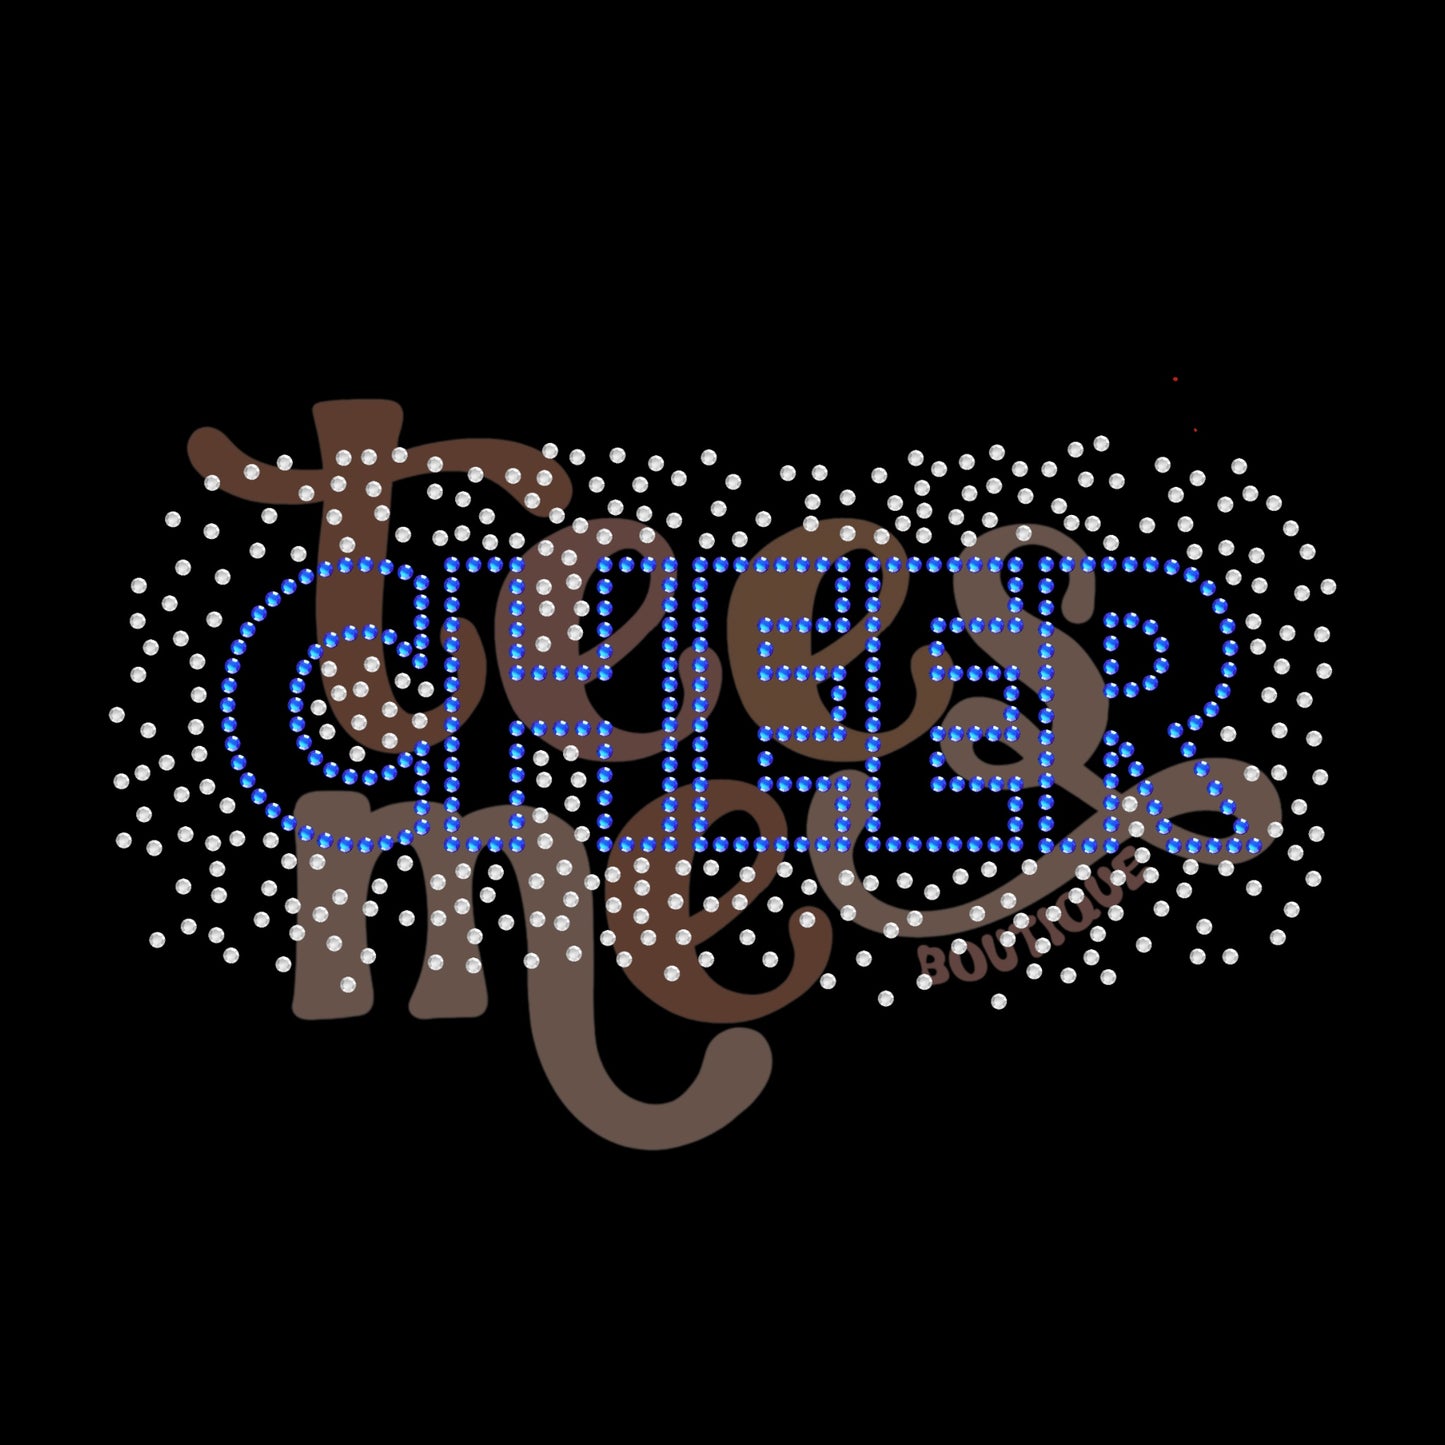 NEW Cheer Scattered SS10 2 Color RHINESTONE TRANSFER